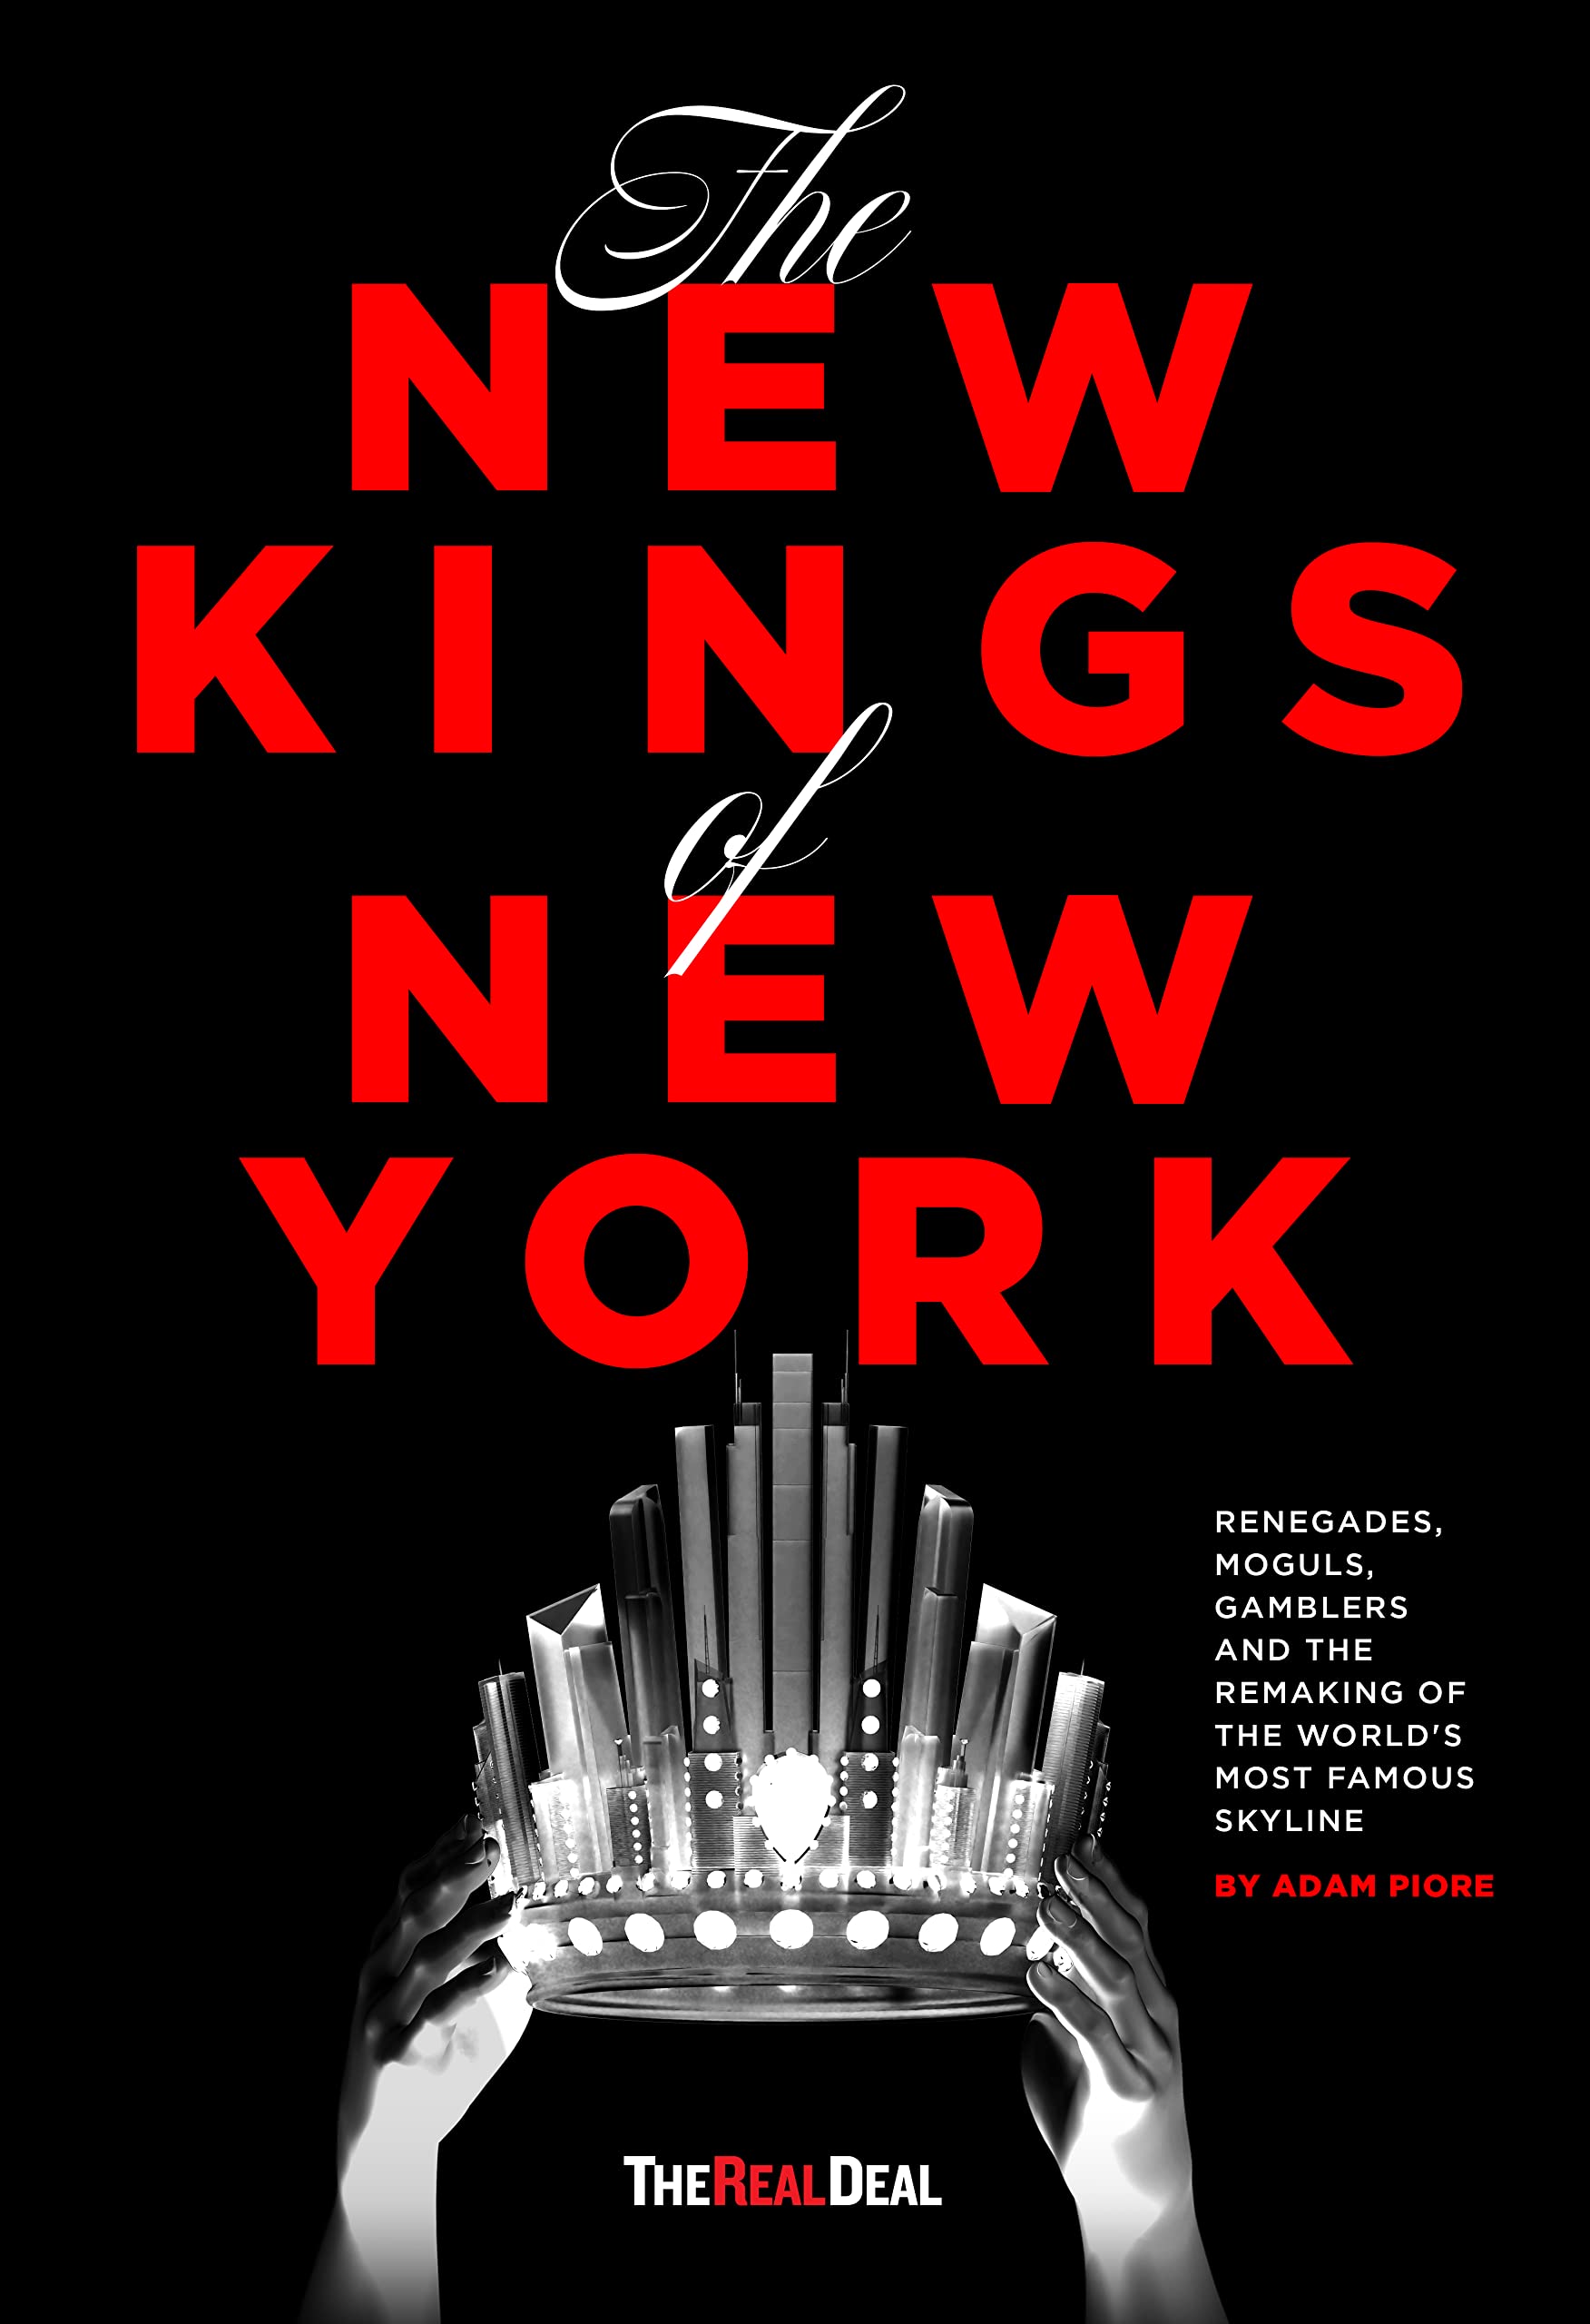 The New Kings of New York by Adam Piore